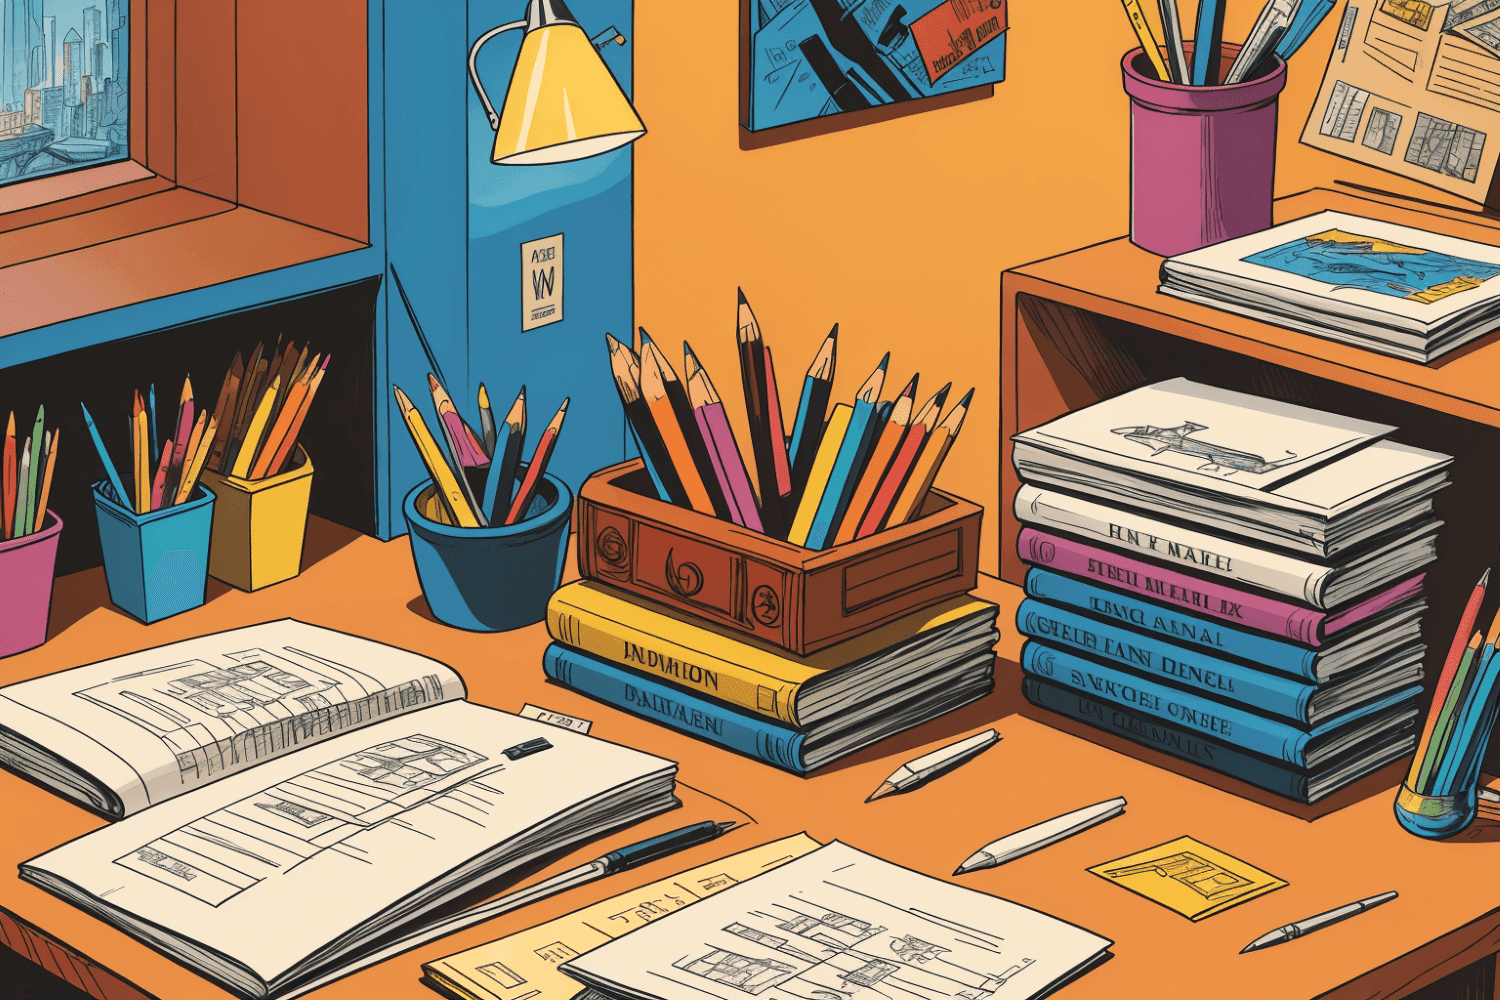 A comic style drawing of a desk, open notebook and tub of pencils